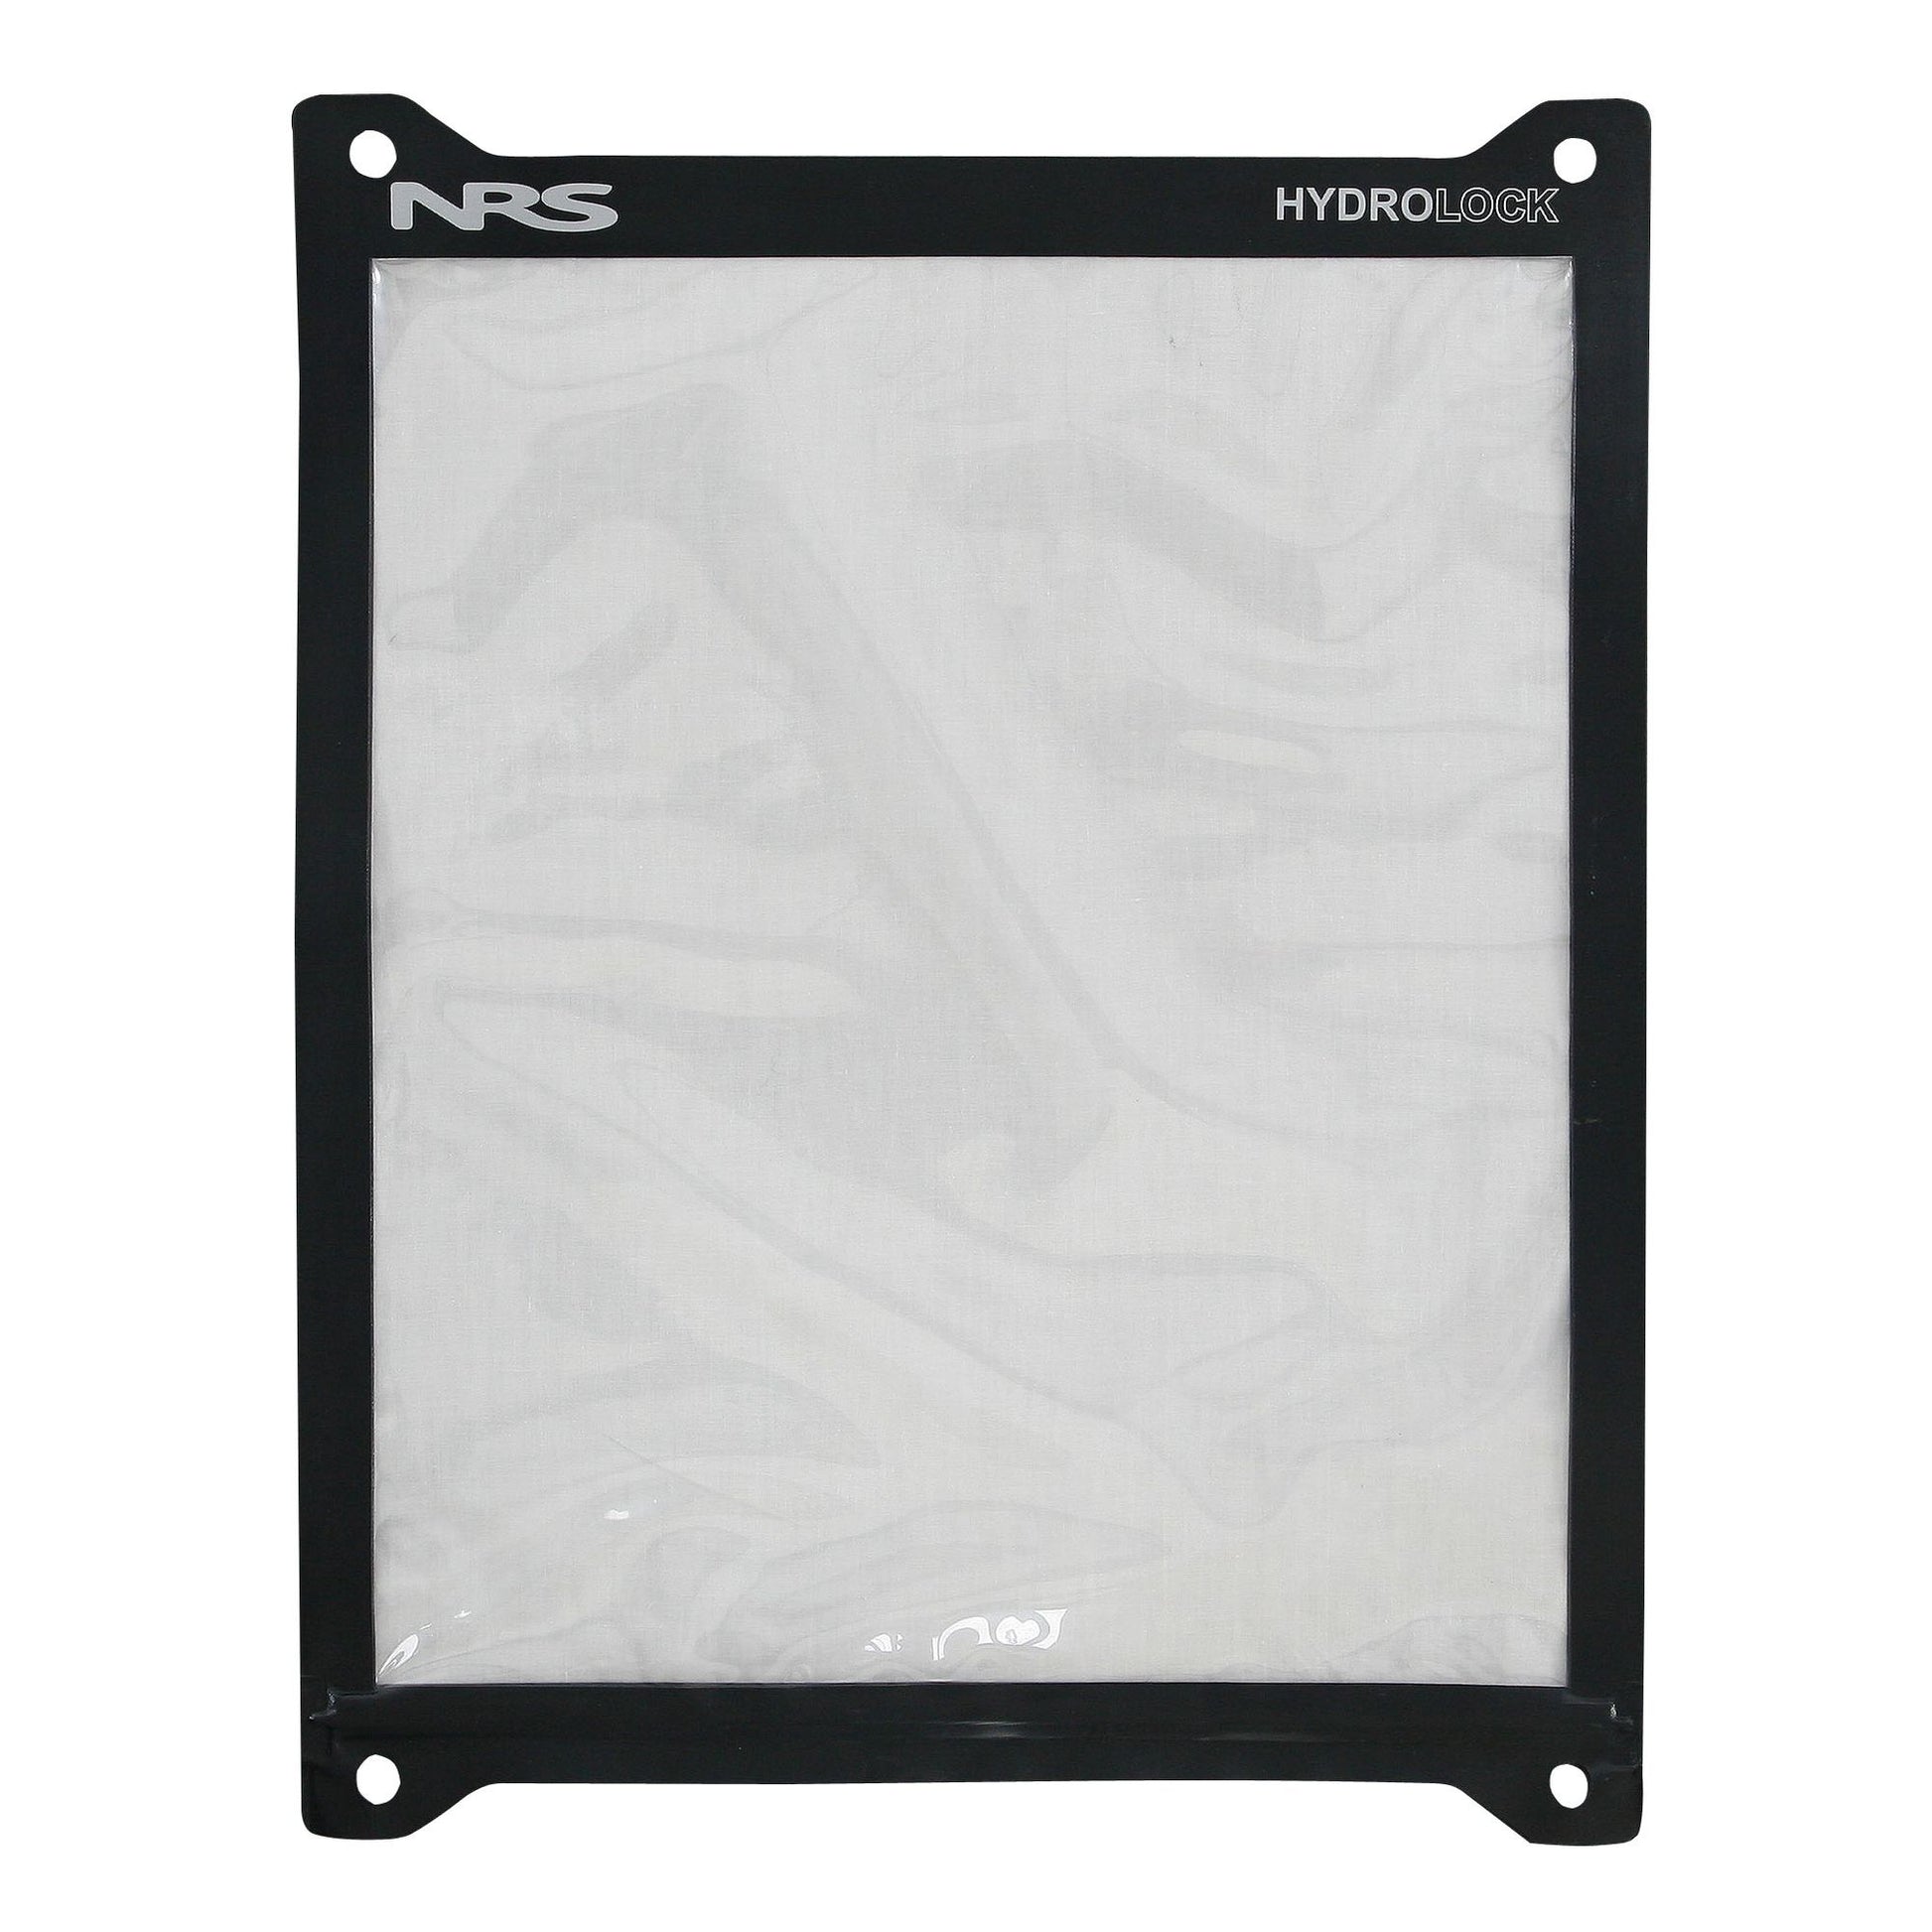 The NRS HydroLock Map Case, featuring a waterproof closure and a clear urethane window, is shown on a white background.